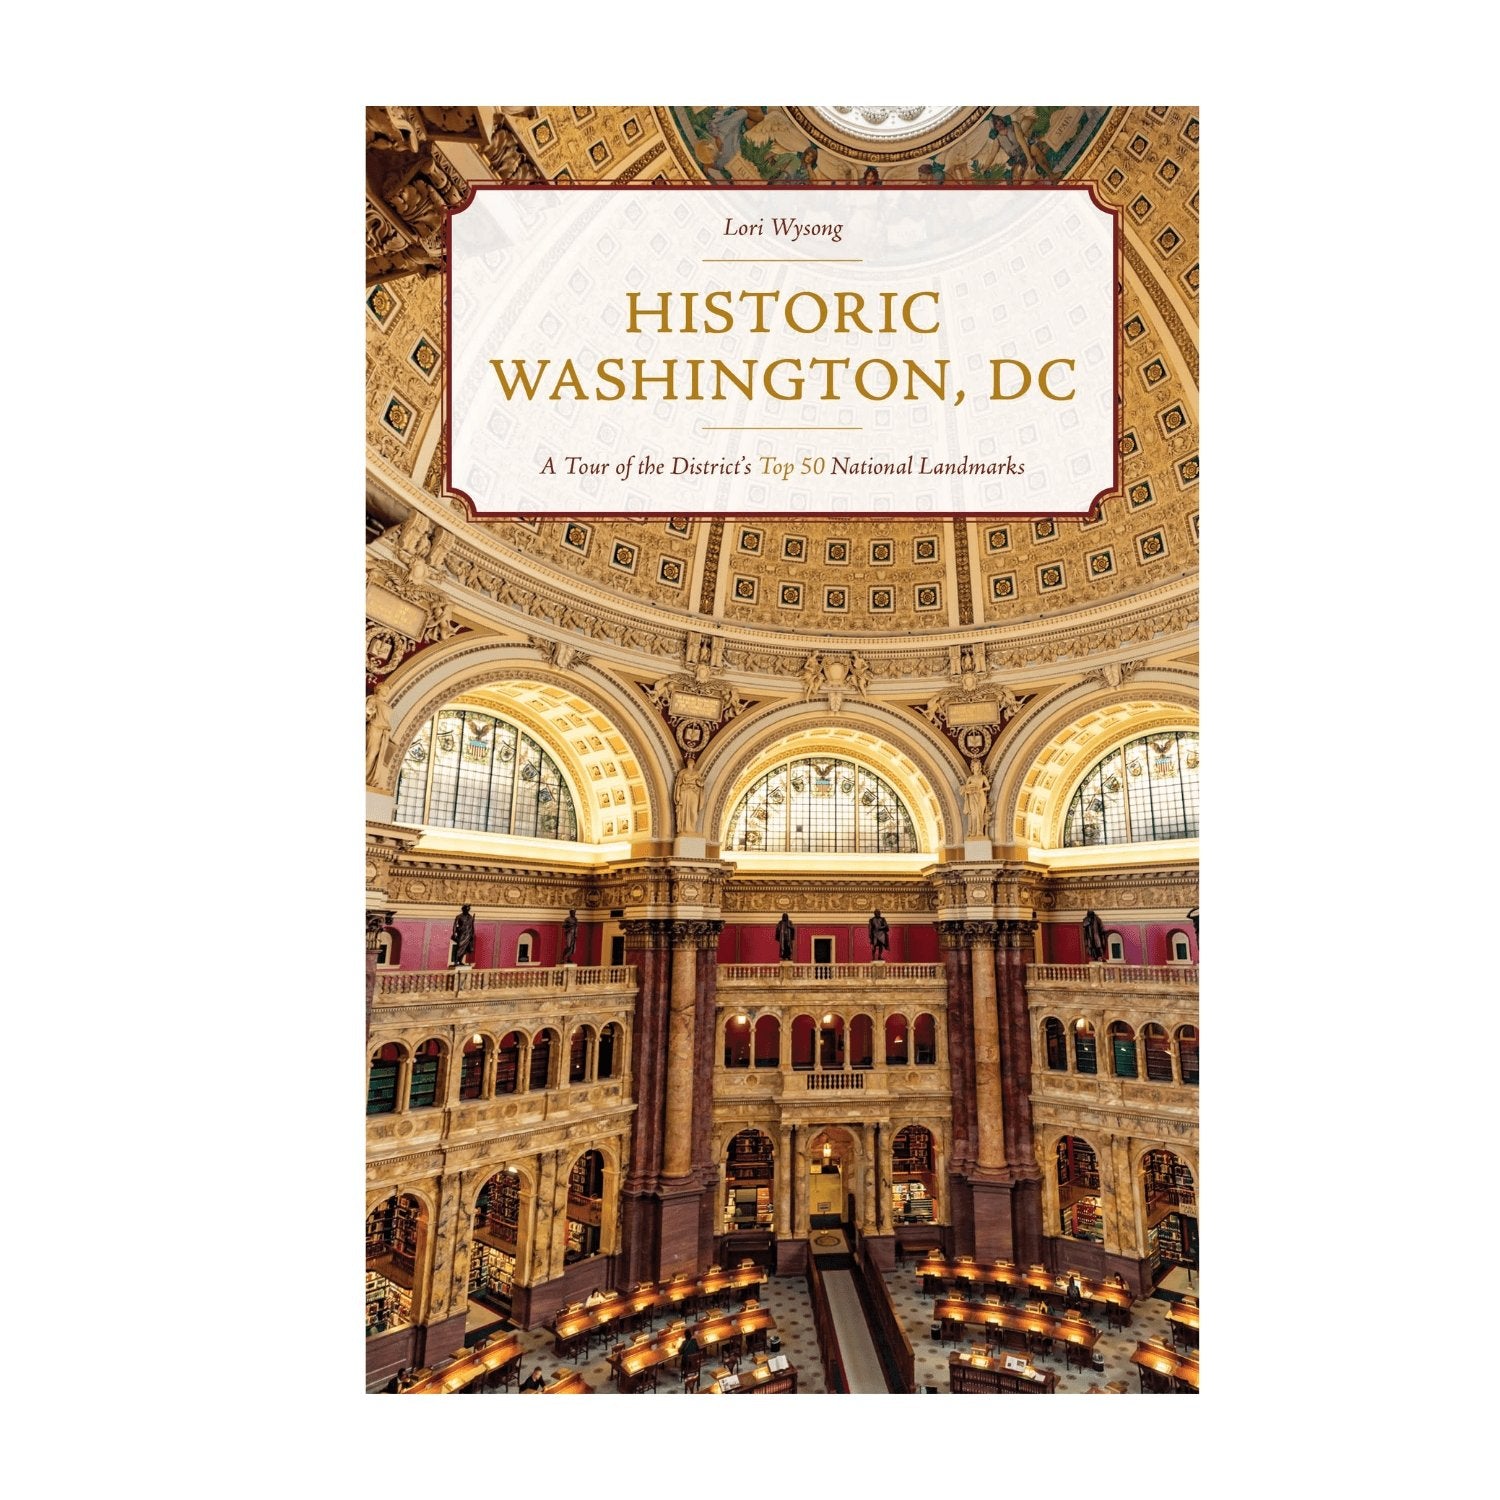 Historic Washington, DC: A Tour of the District's Top 50 National Landmarks [Book]